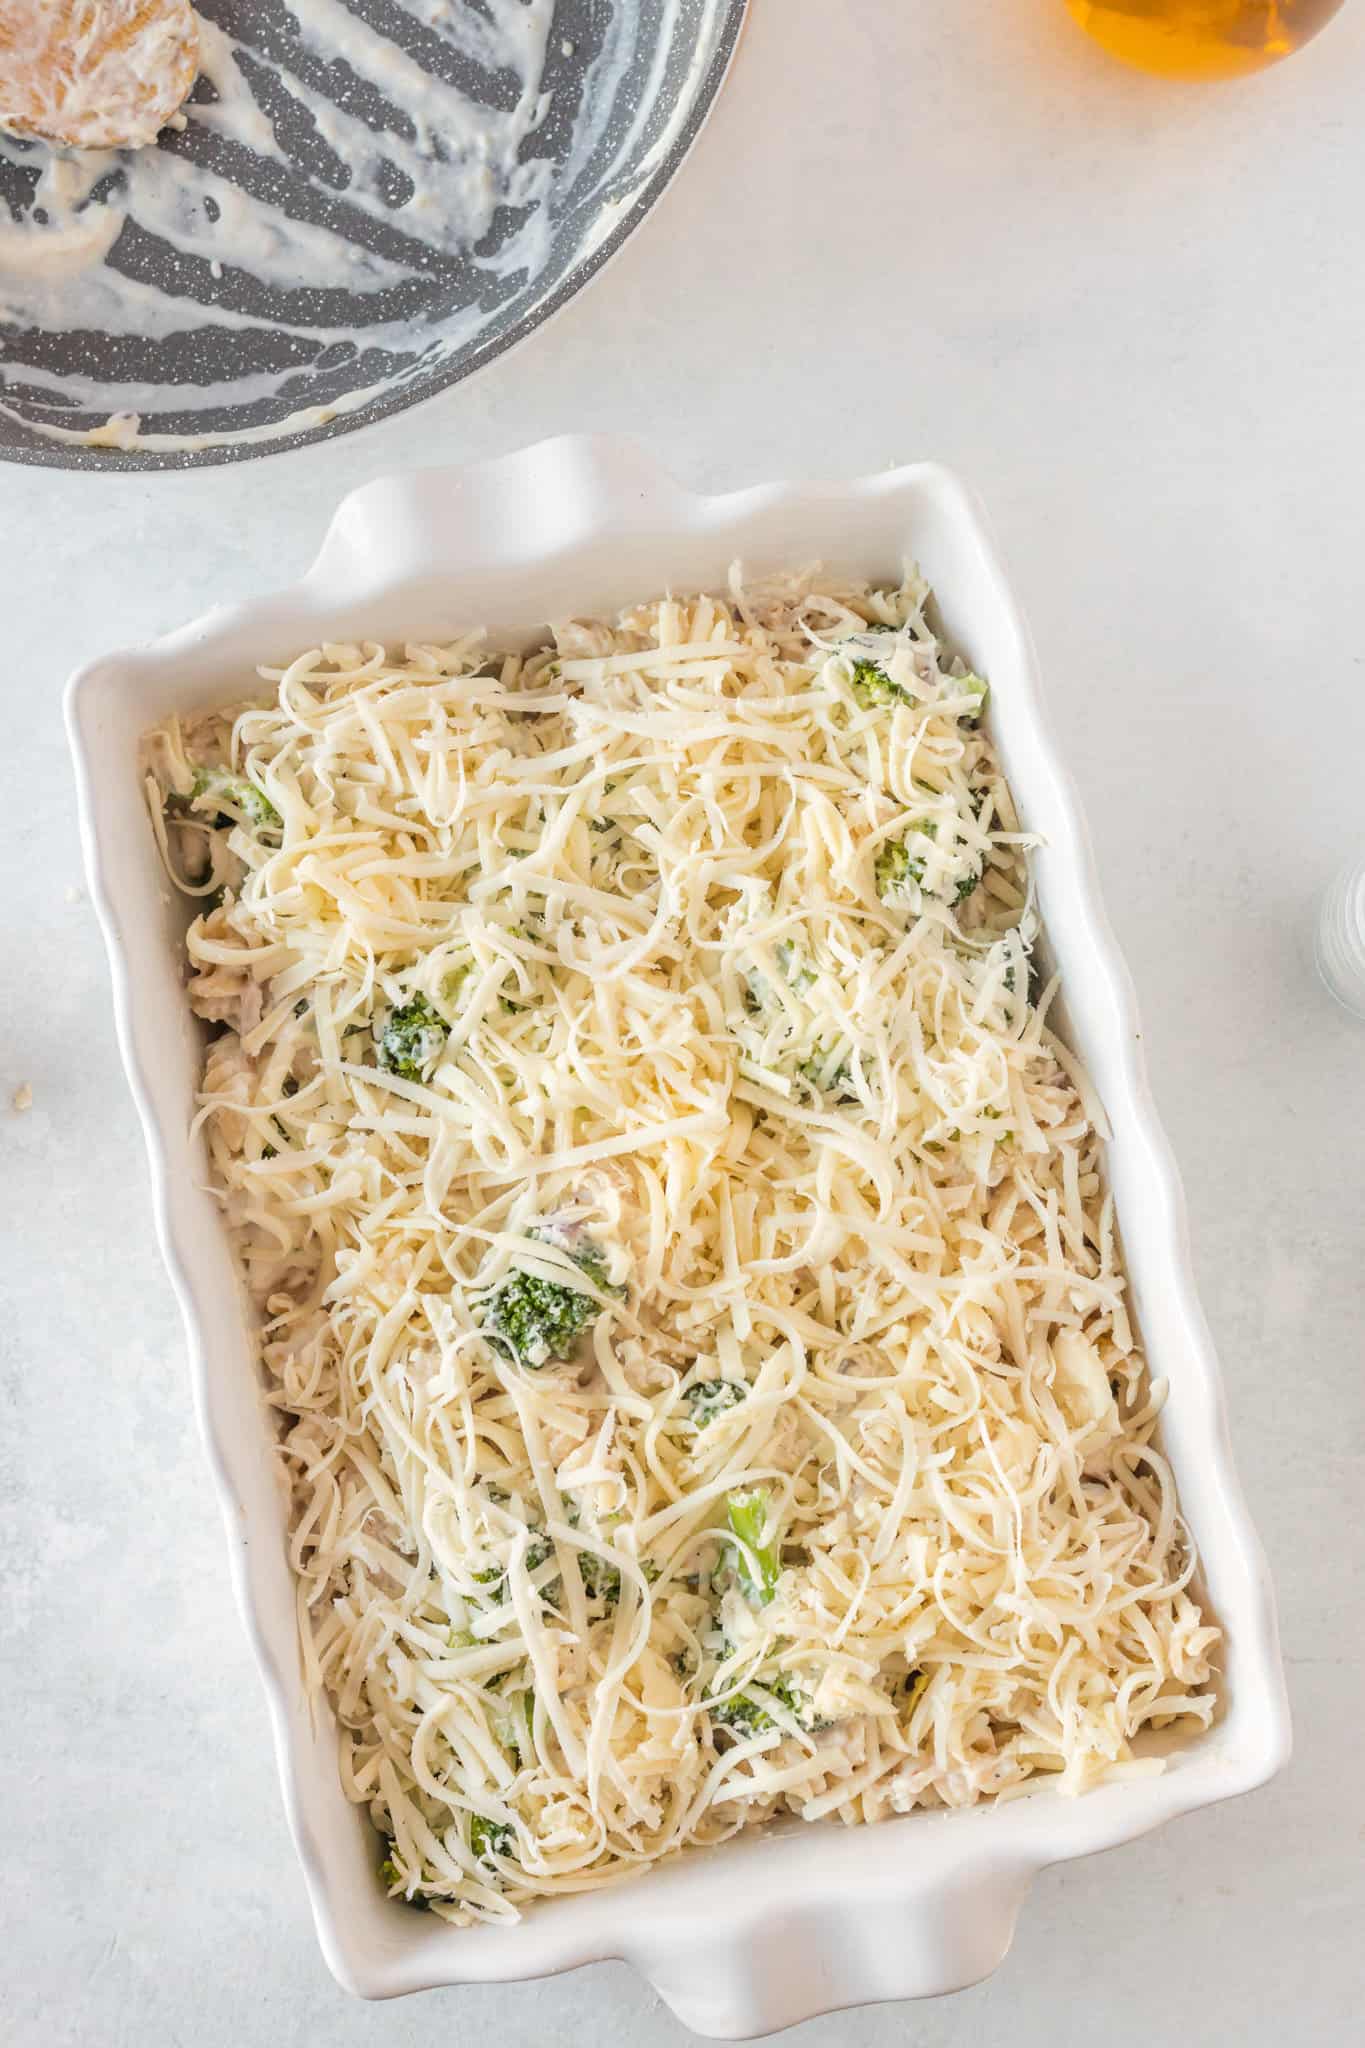 shredded cheddar cheese on top of chicken, broccoli and pasta mixture in a baking dish